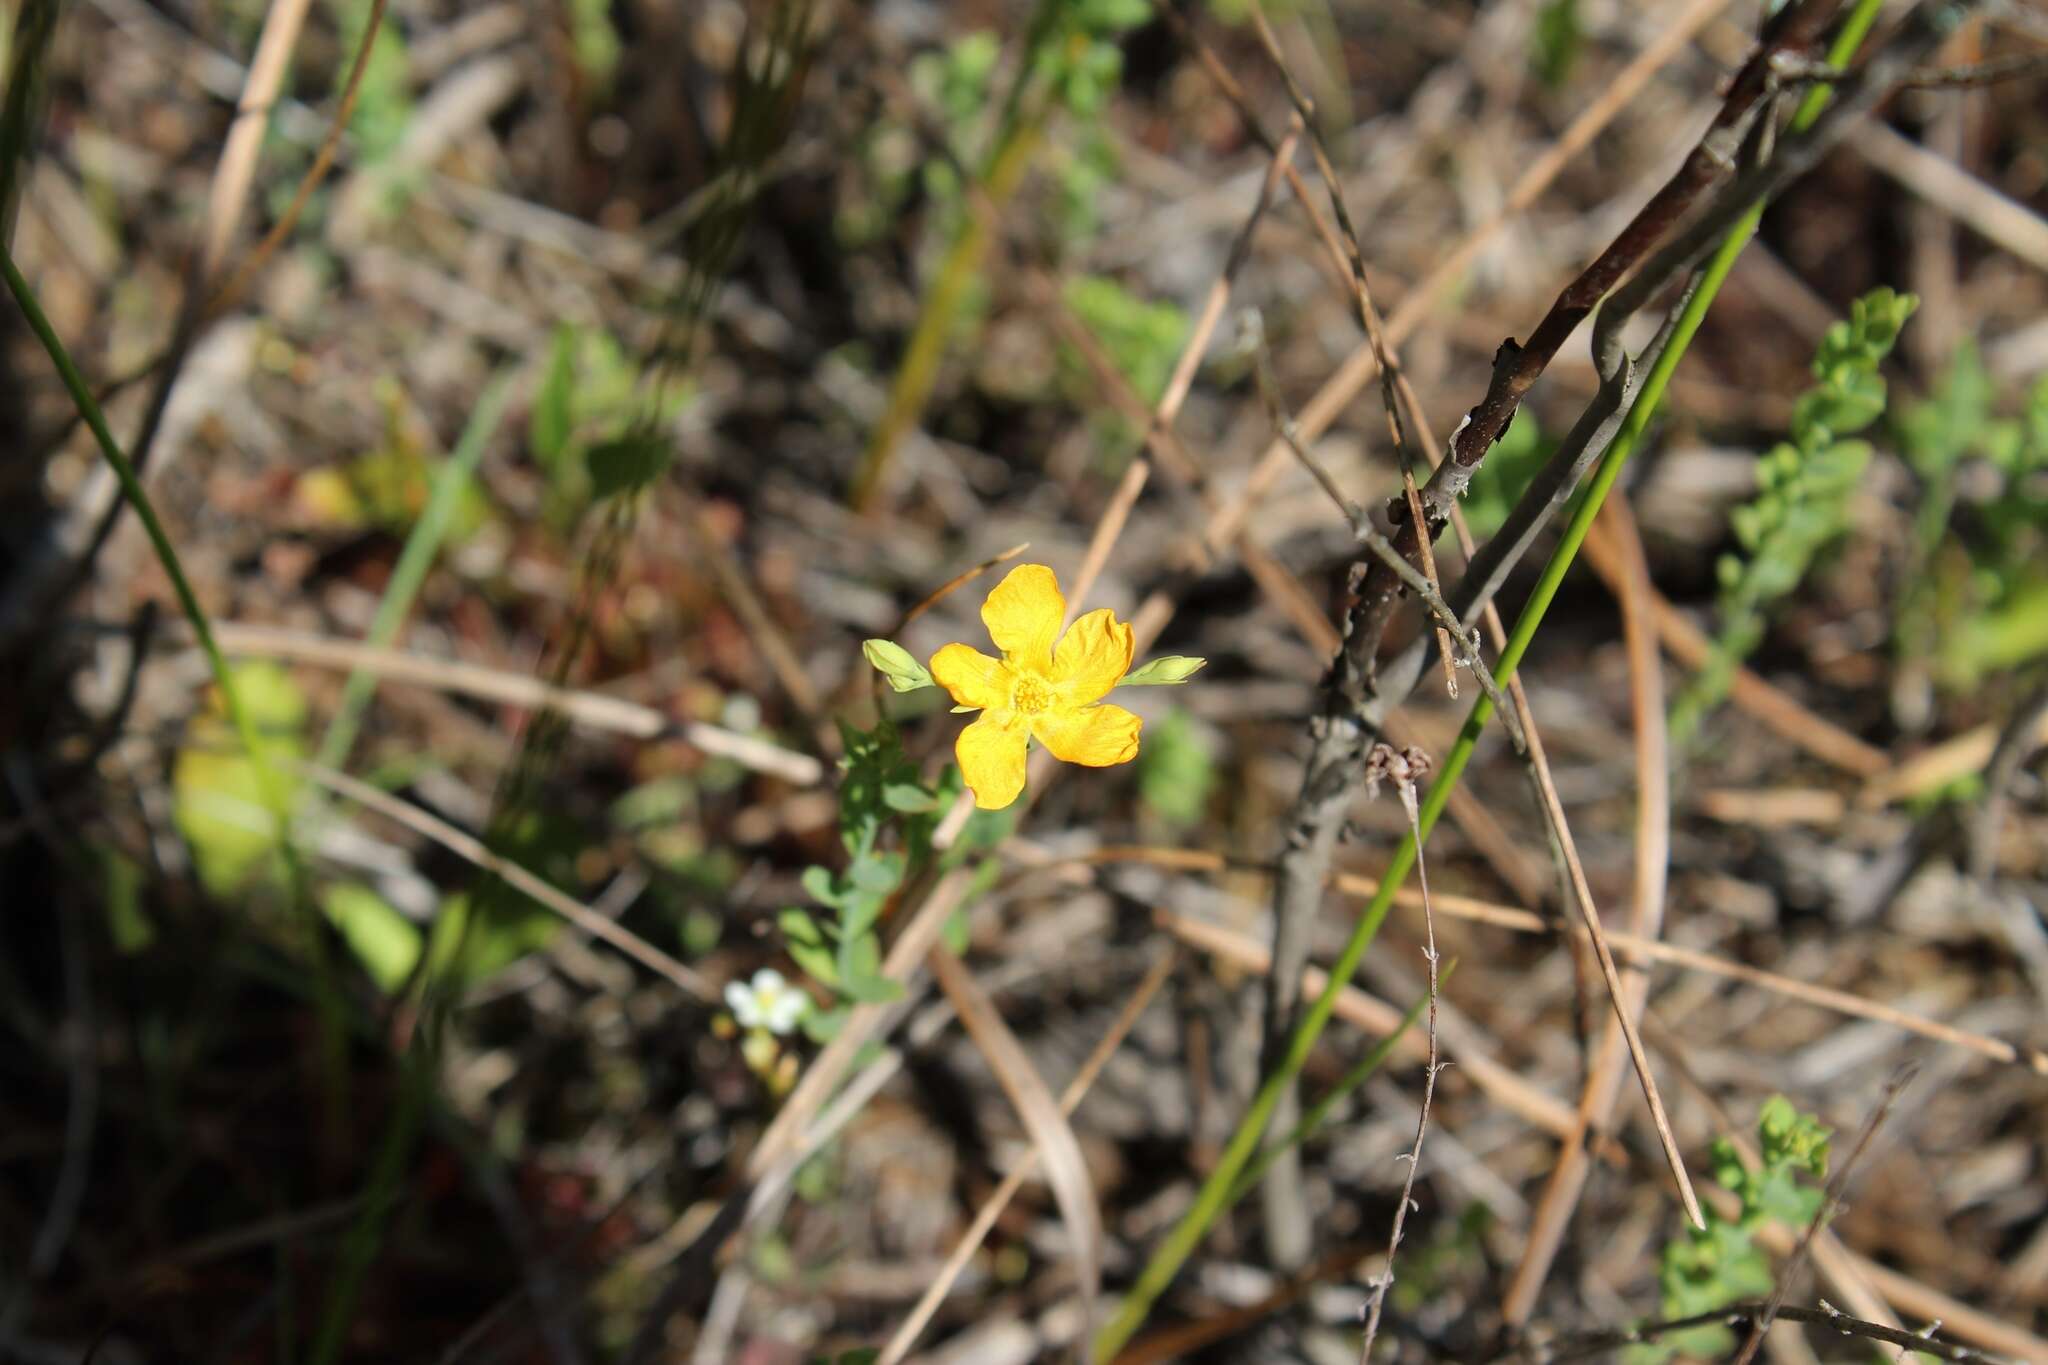 Image of coppery St. Johnswort